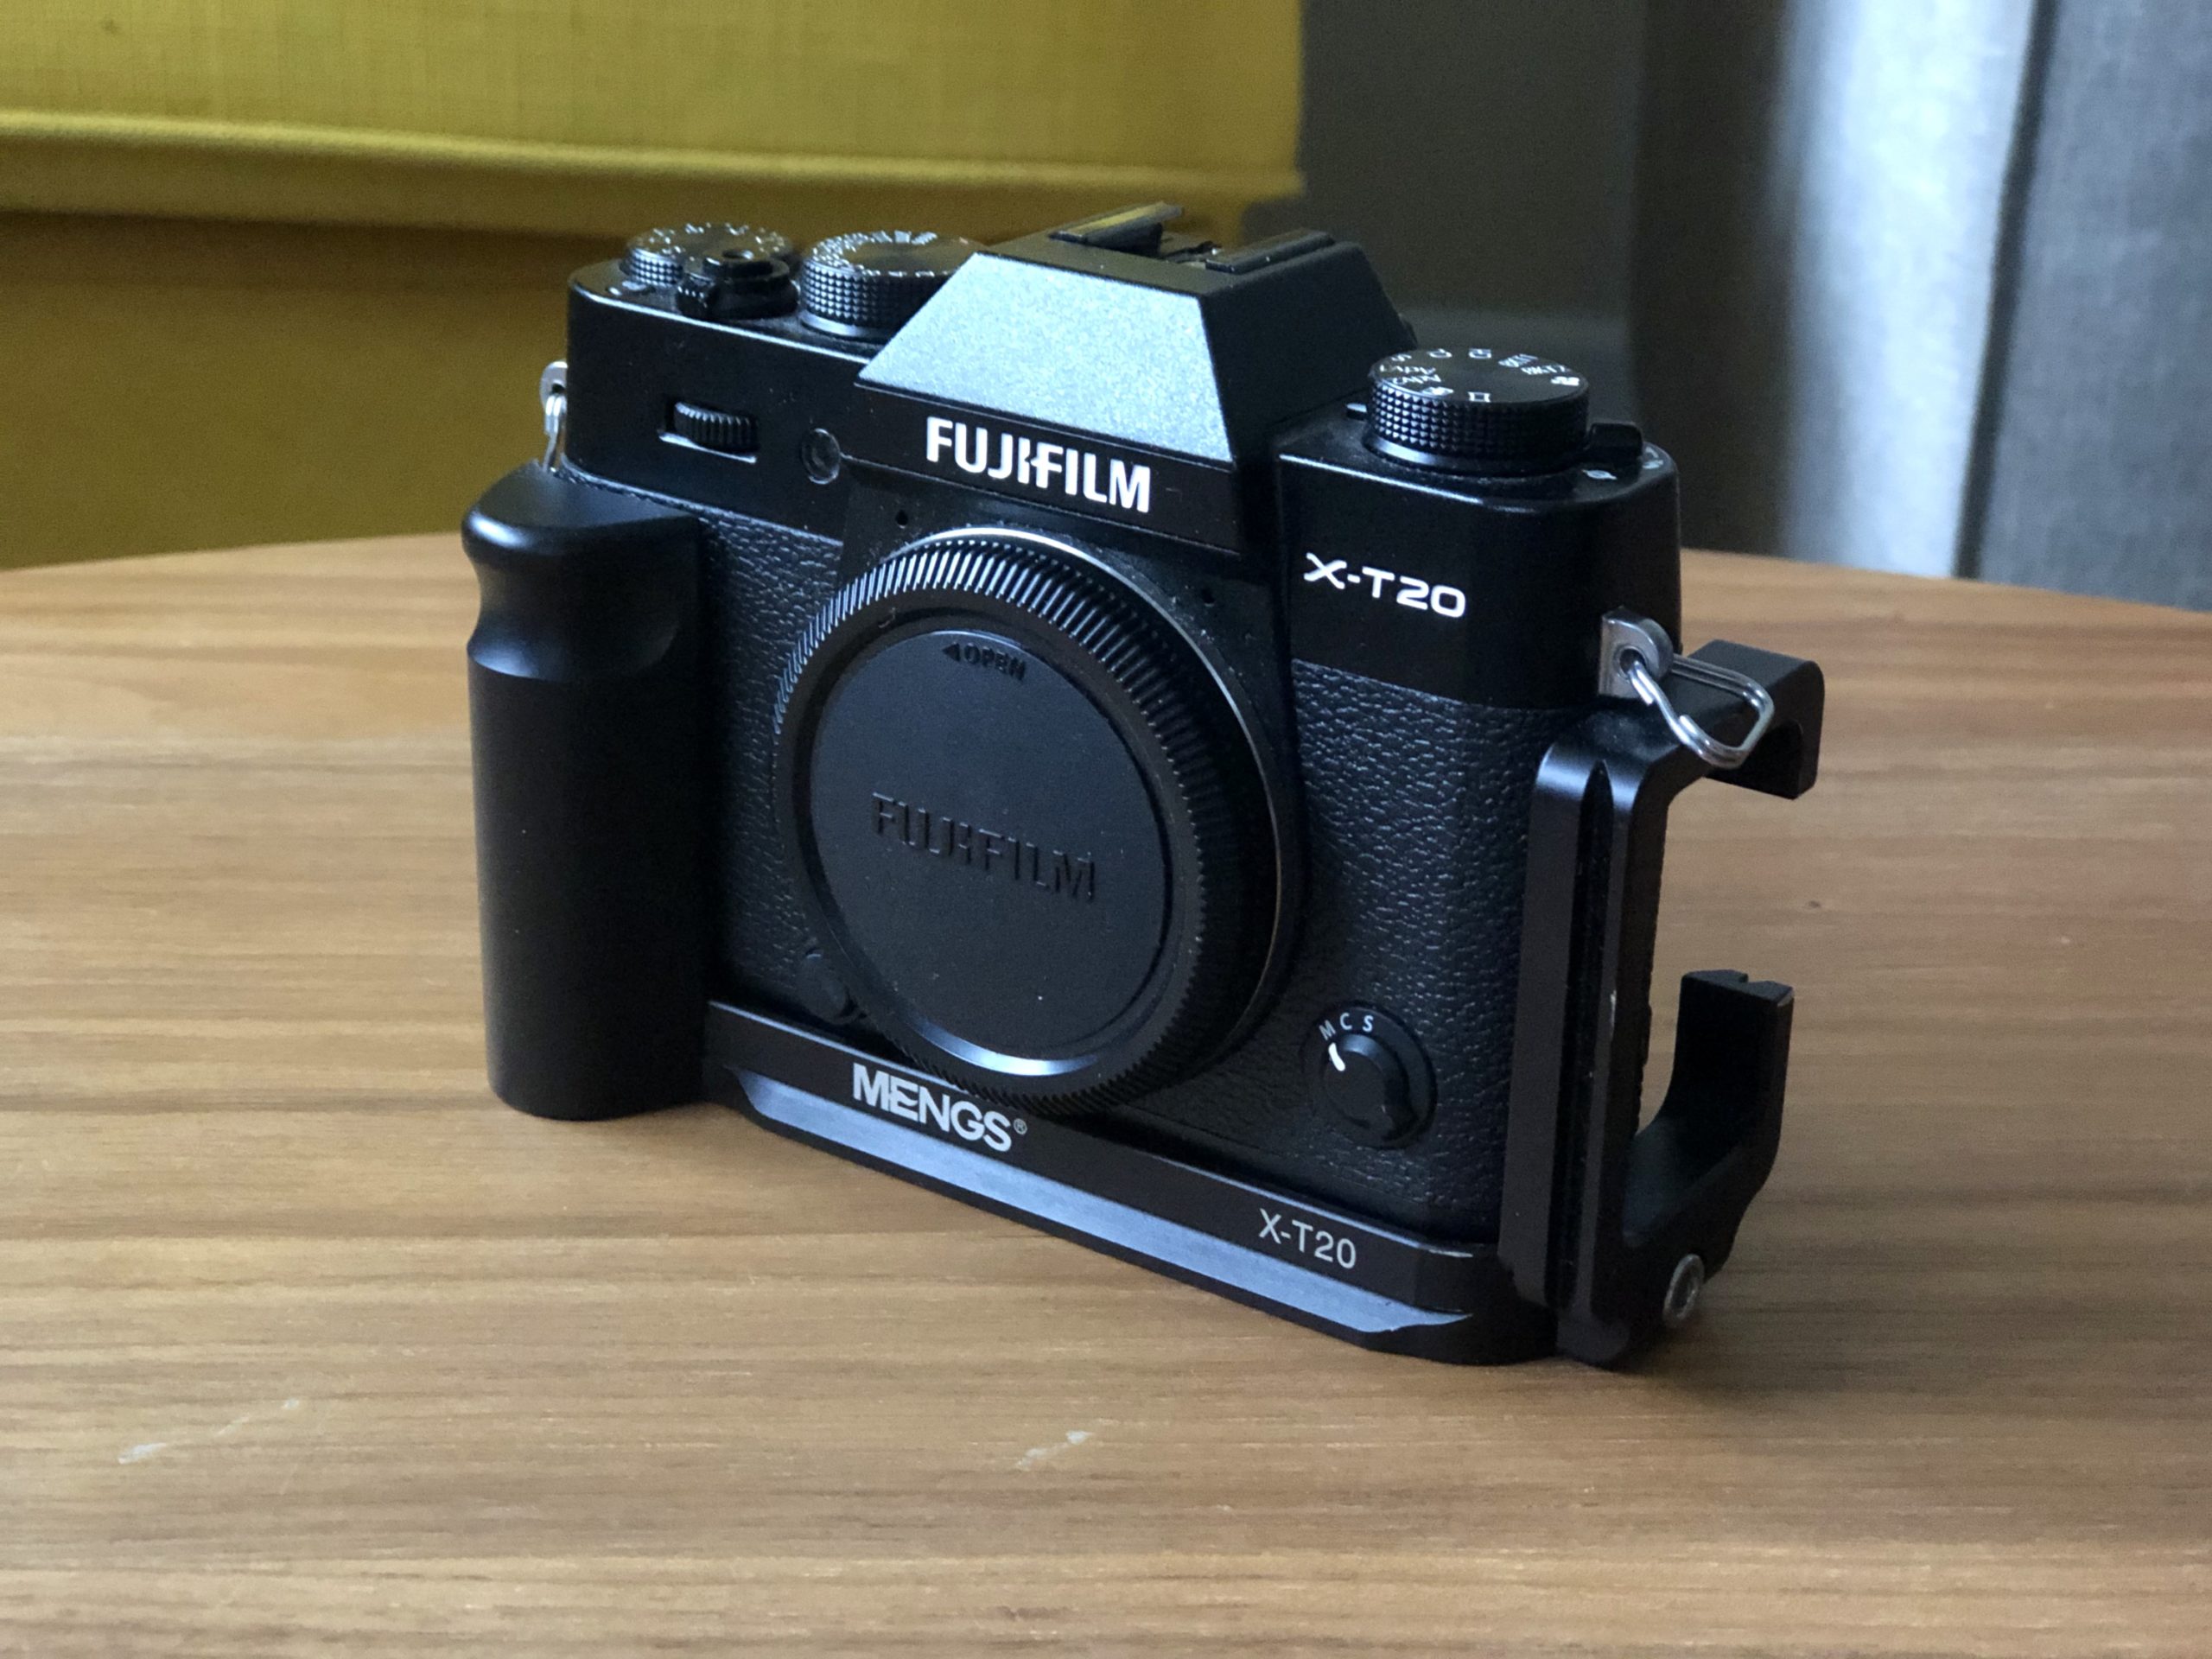 Fuji X-T20 with Mengs grip